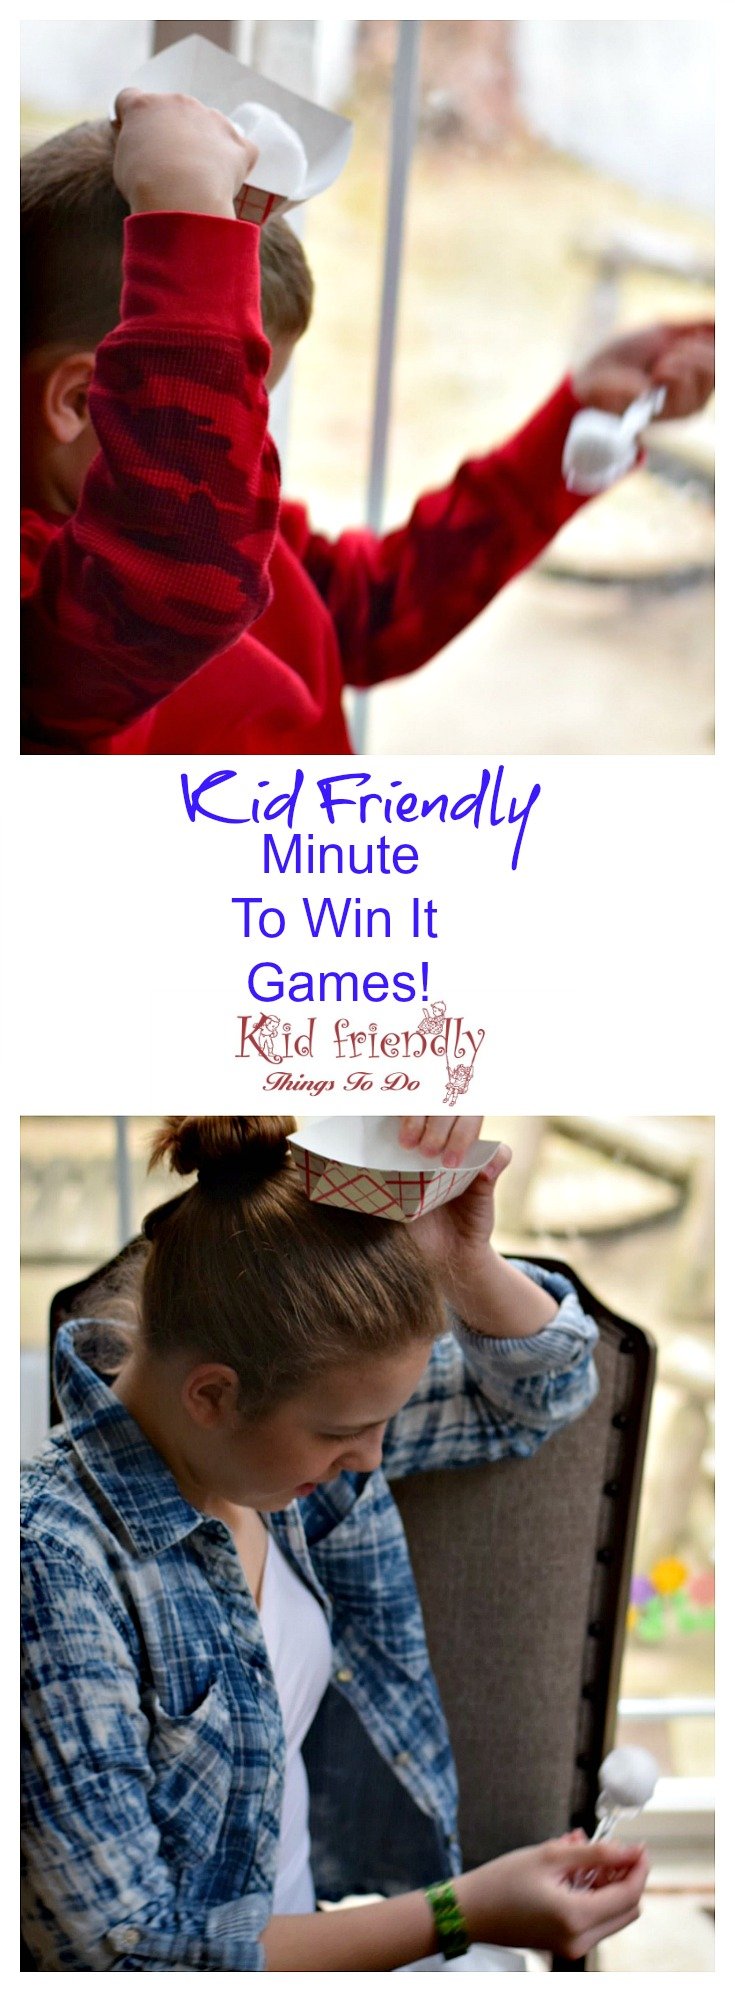 Even More Fun Kid Friendly Minute To Win it Games! Fun for the whole family! Great for parties - like Christmas, New Years, Teenage, Classroom and more! www.kidfriendlythingstodo.com